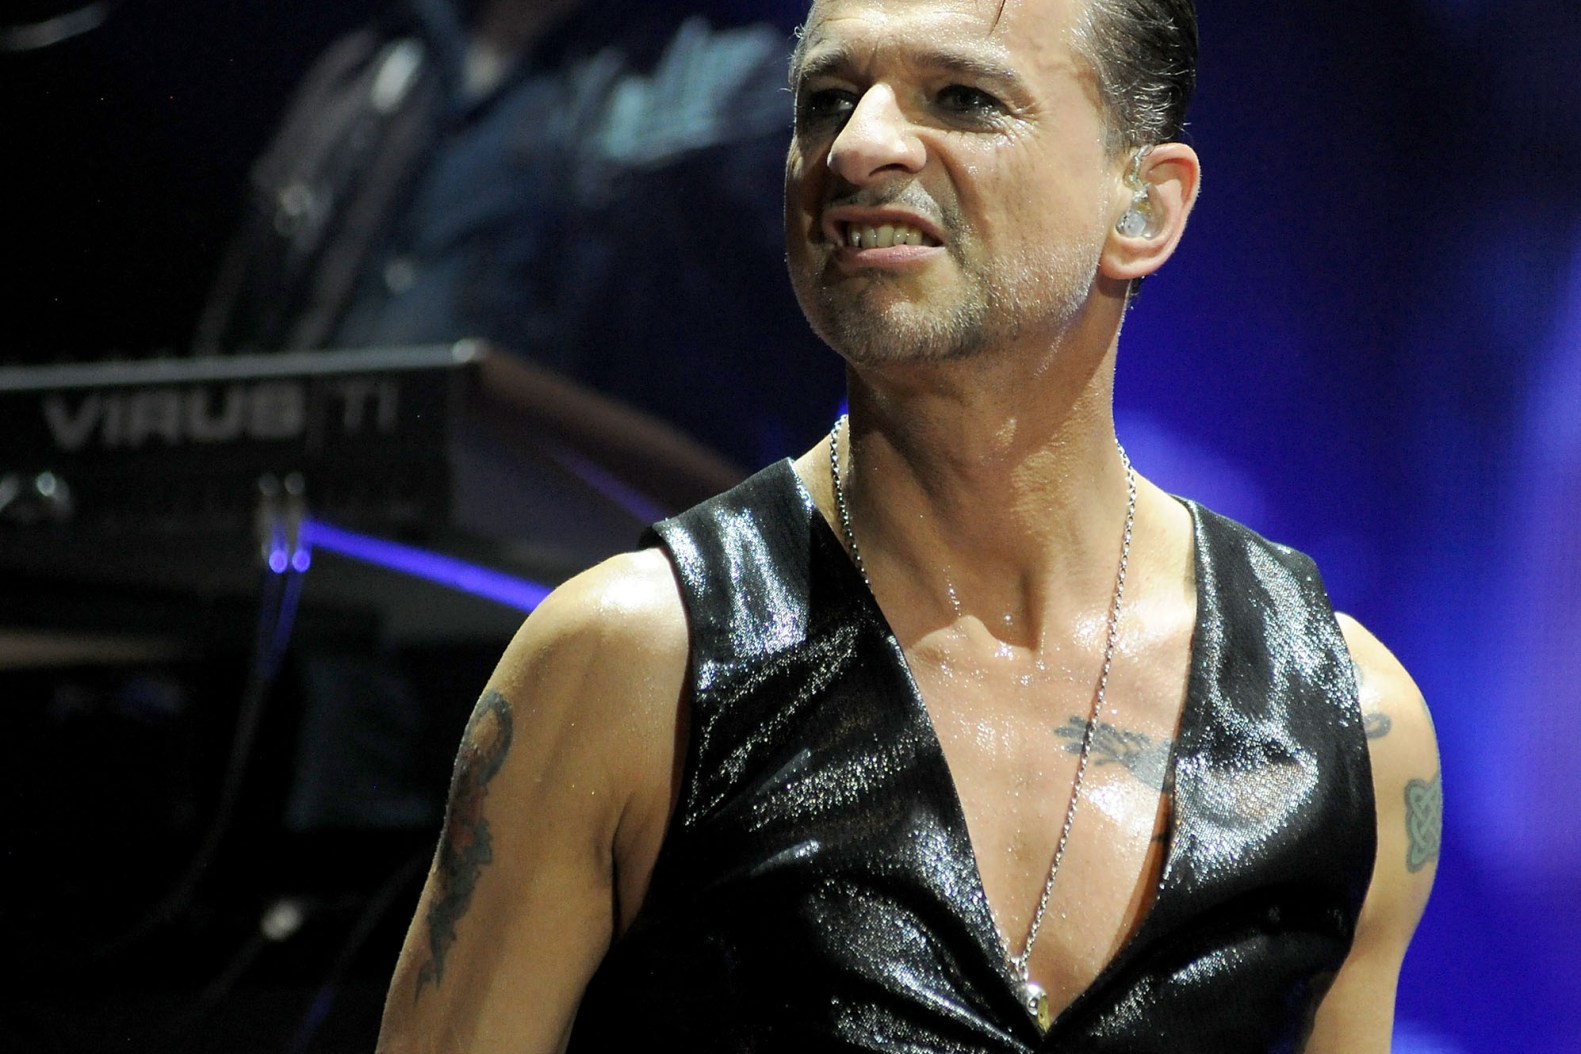 taille-dave-gahan-Image